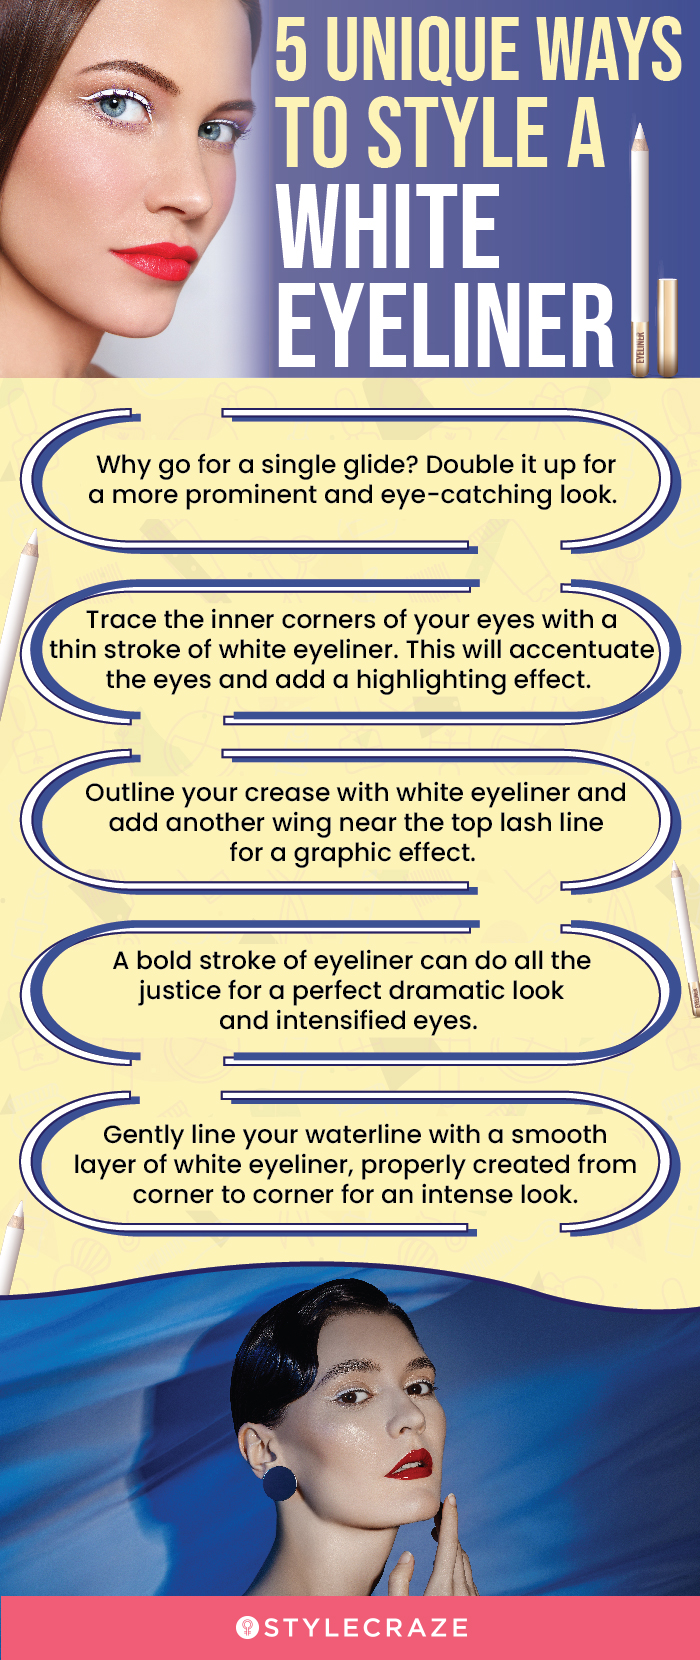 How To Create The Perfect Cat Eye Makeup With A Japanese Eyeliner (infographic)